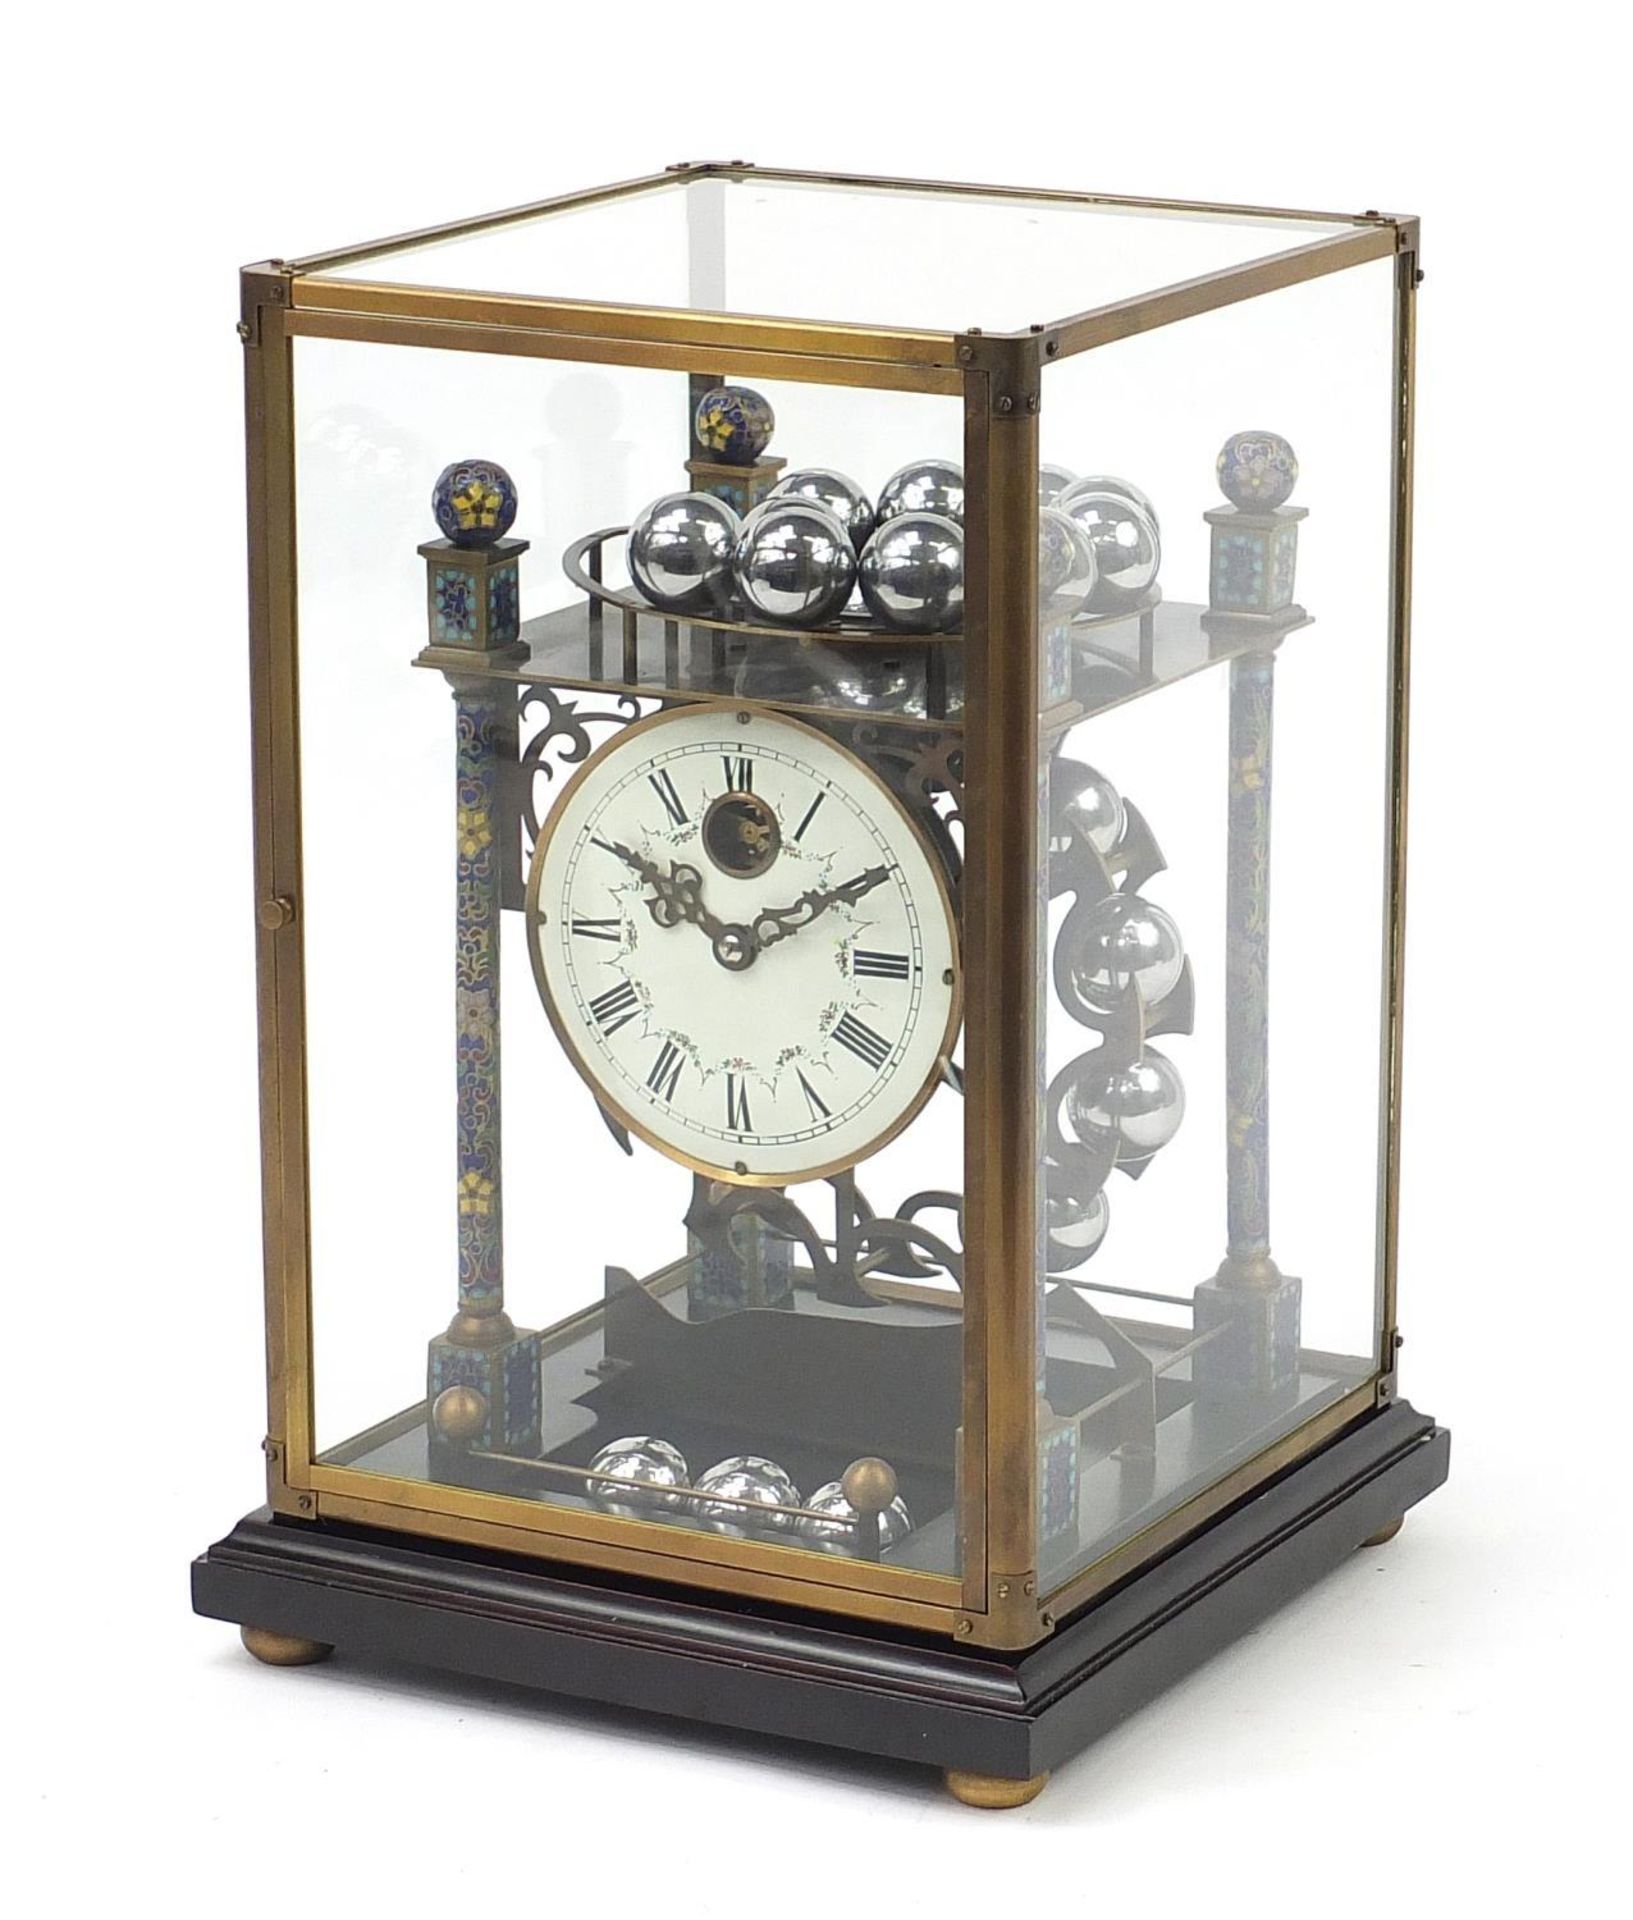 Champlevé enamel rolling ball clock with enamel dial having Roman numerals and glass display case,